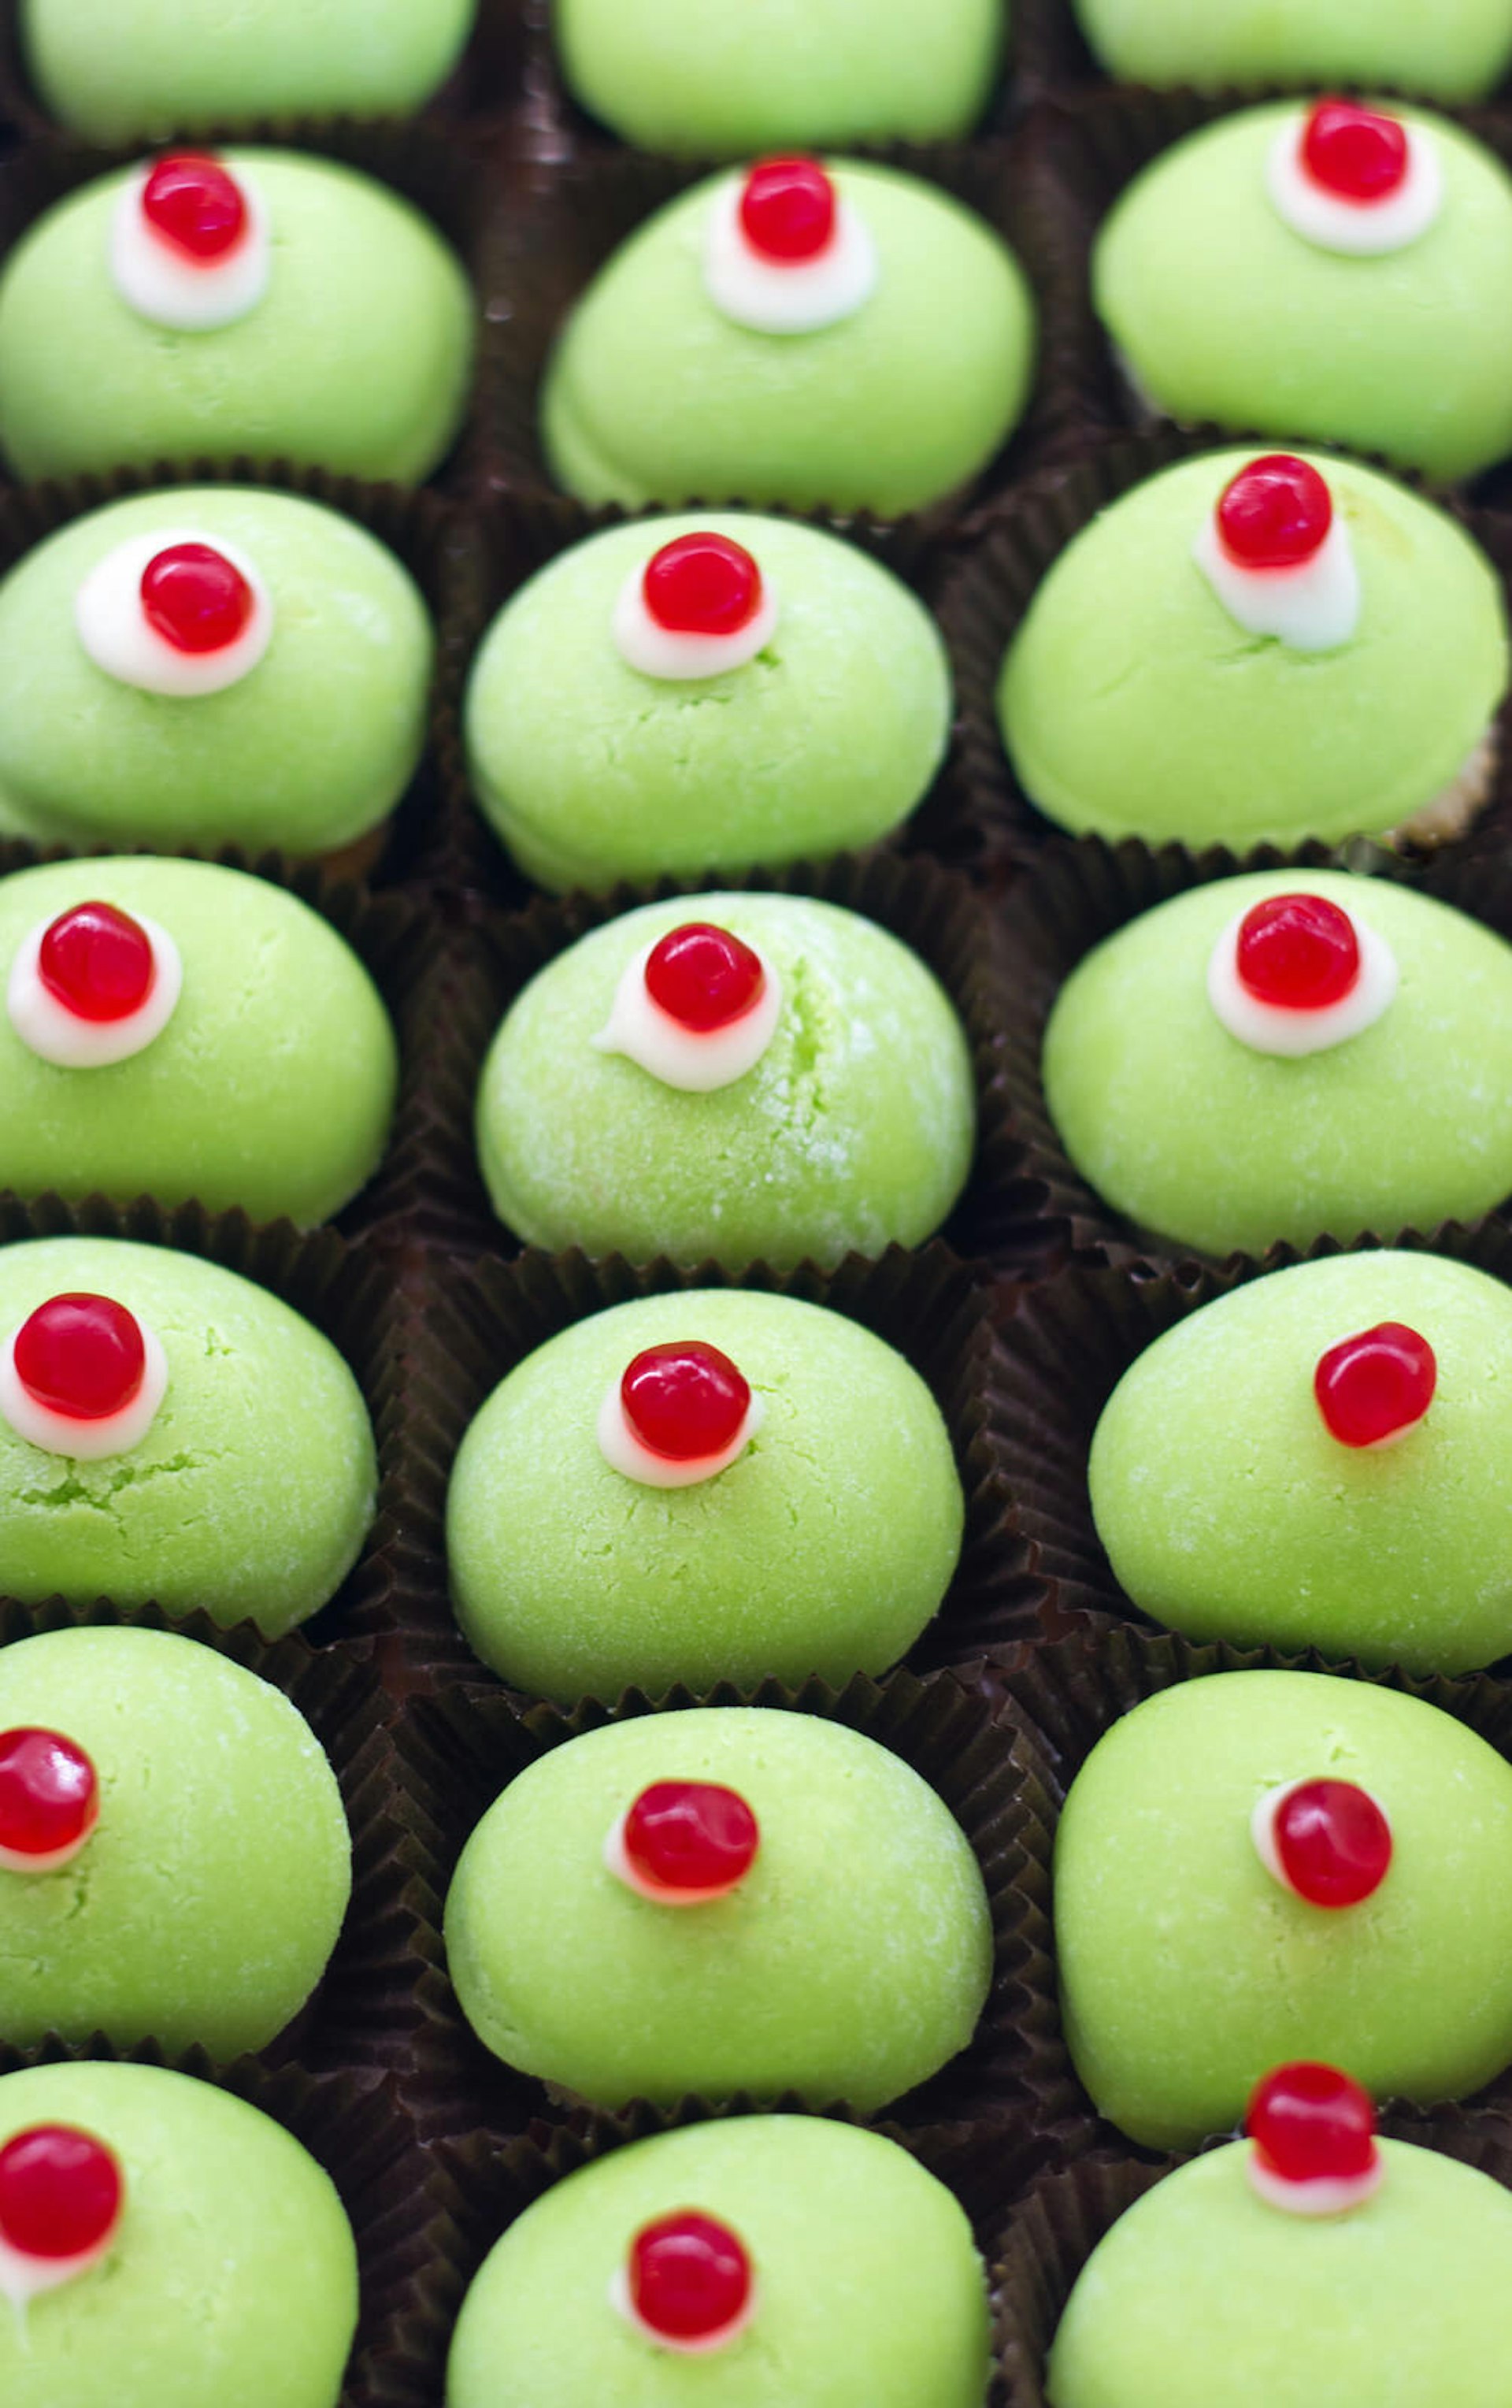 Green minni di virgini (virgin's breasts) pastries with cherries on top © Jann Huizenga / Getty Images